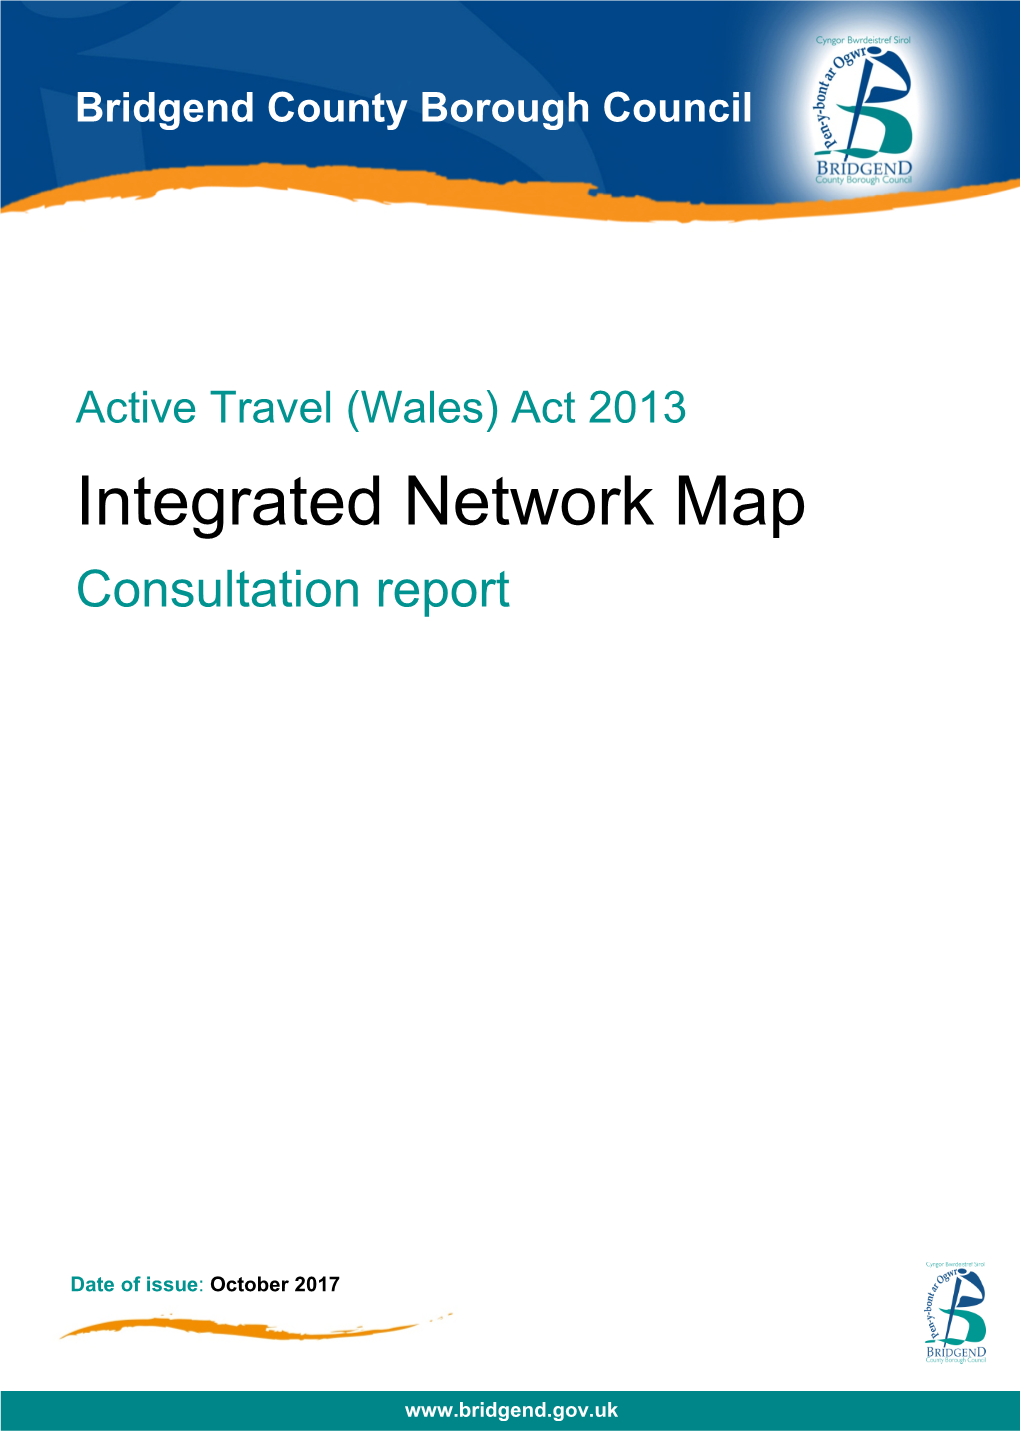 Active Travel (Wales) Act 2013 Integrated Network Map Consultation Report